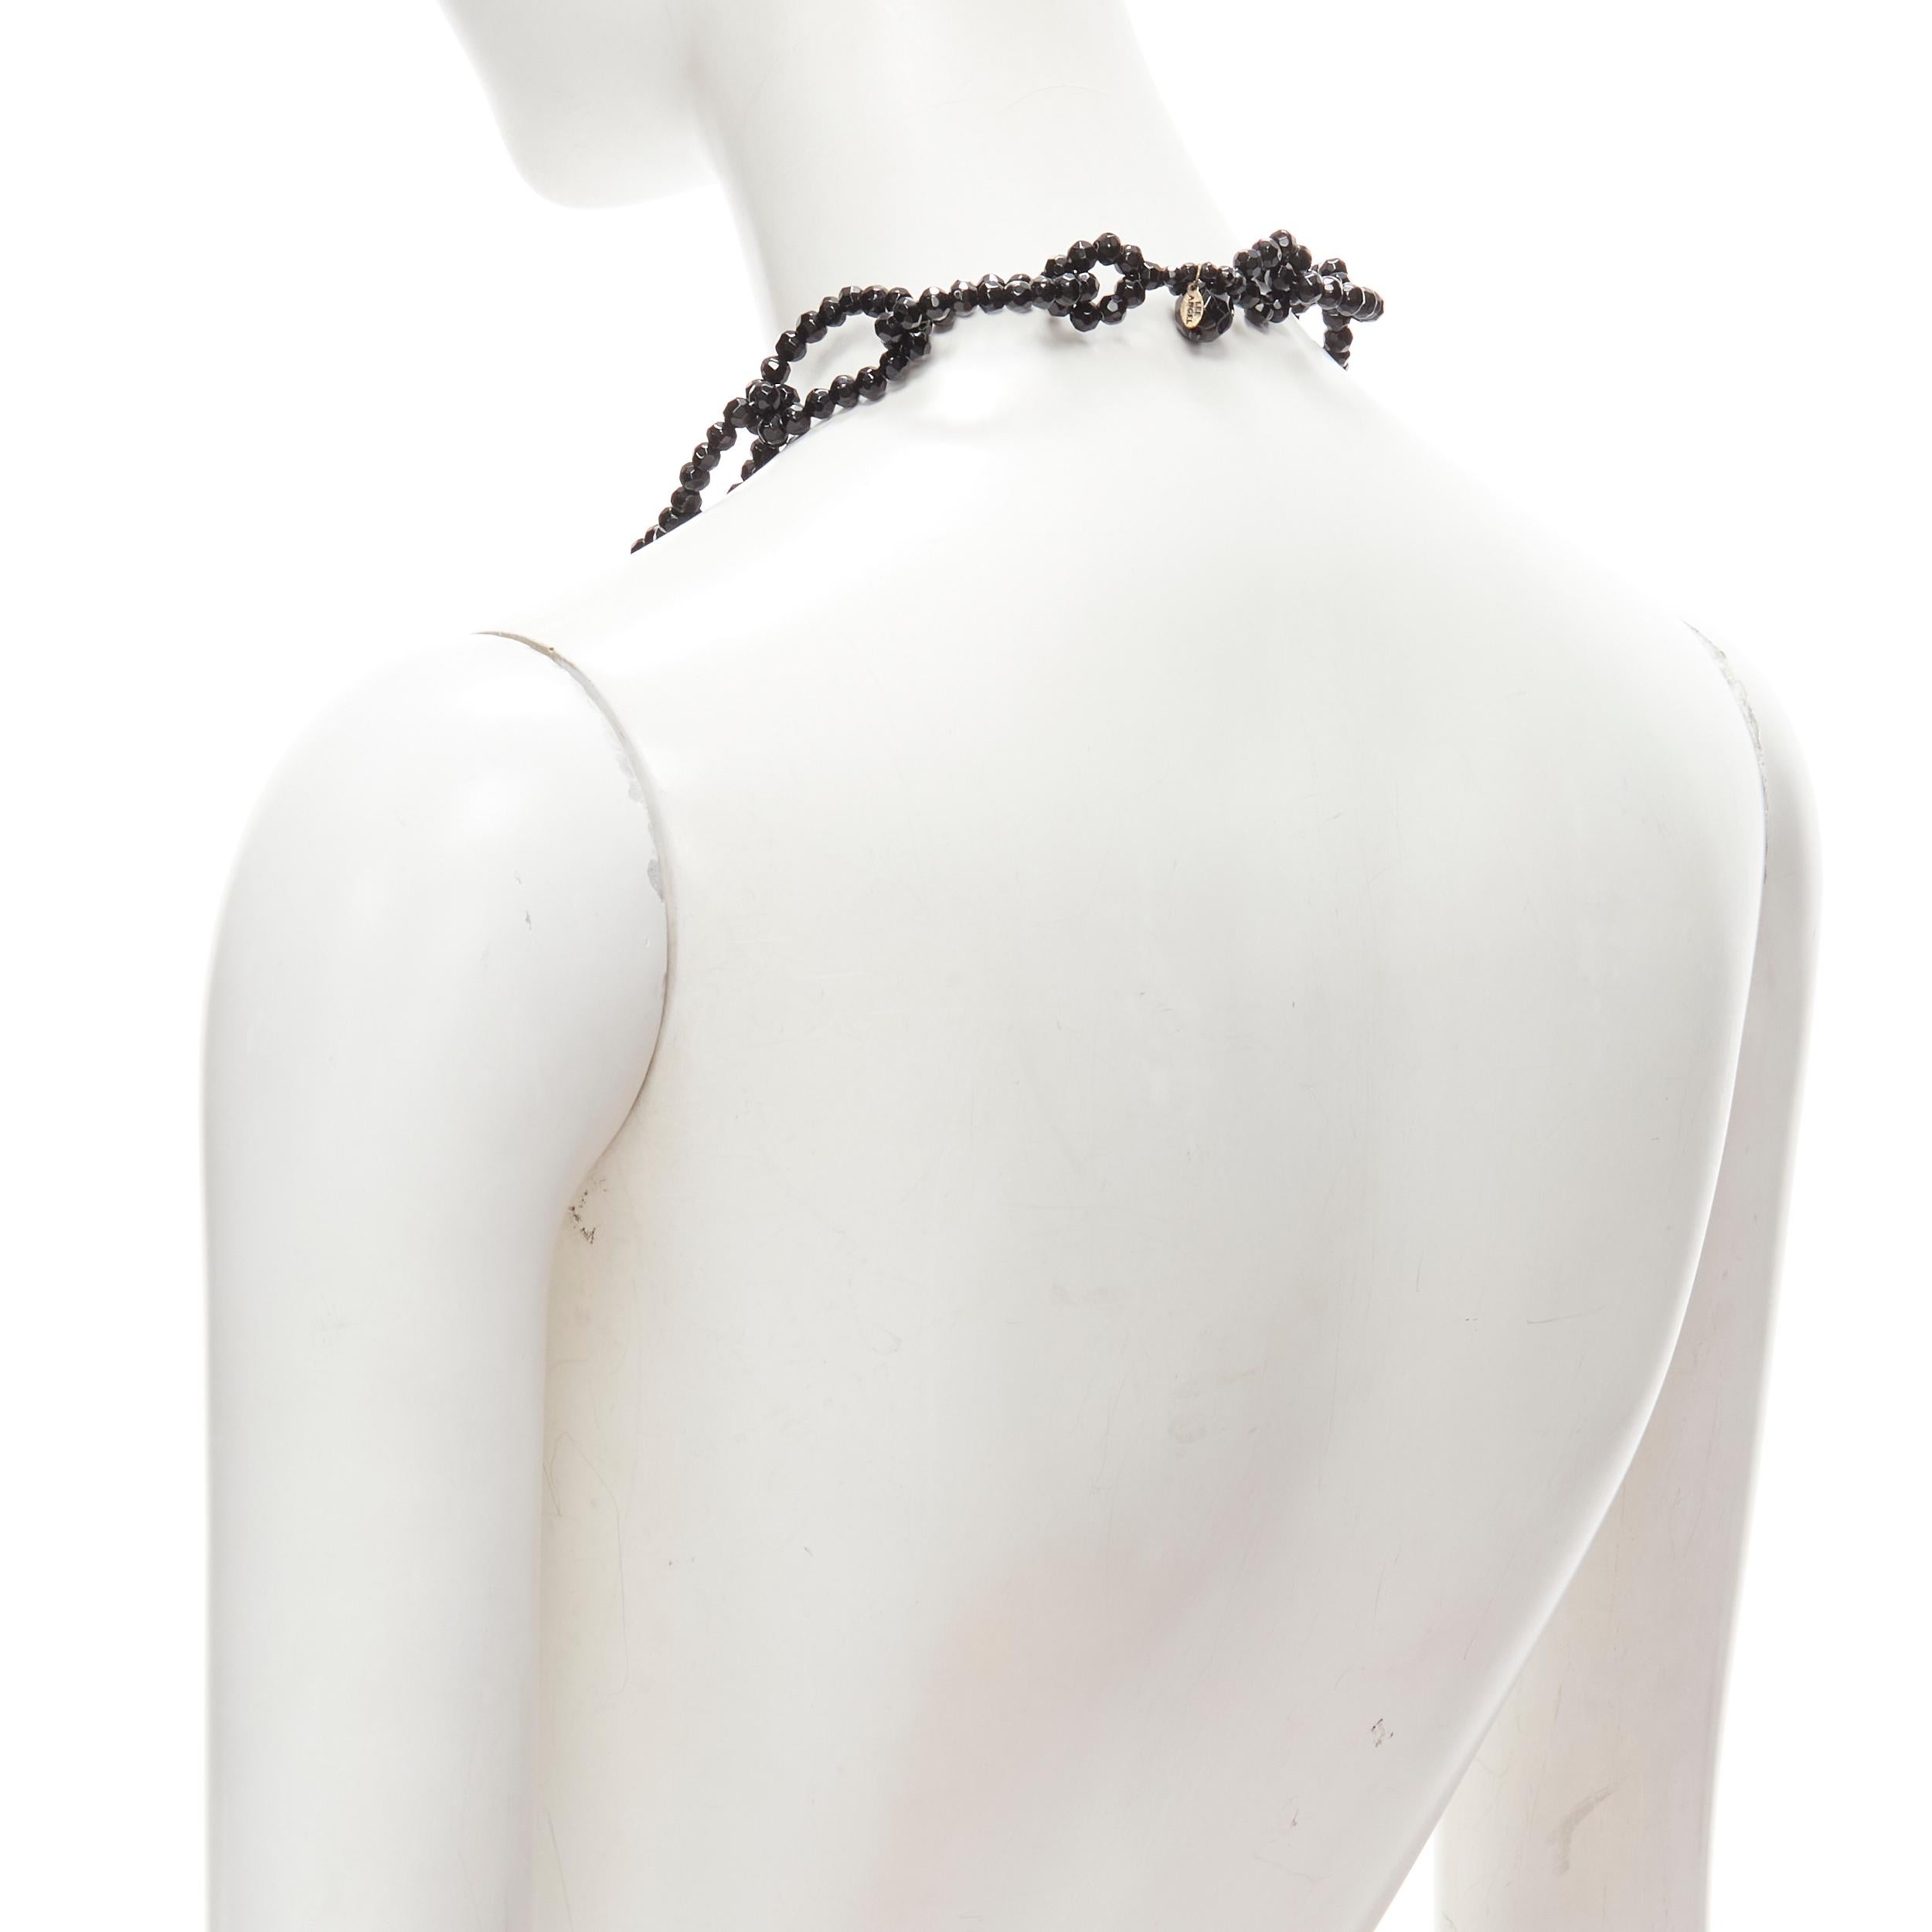 LEE ANGEL black beads loop chain long oversized statement necklace For Sale 1